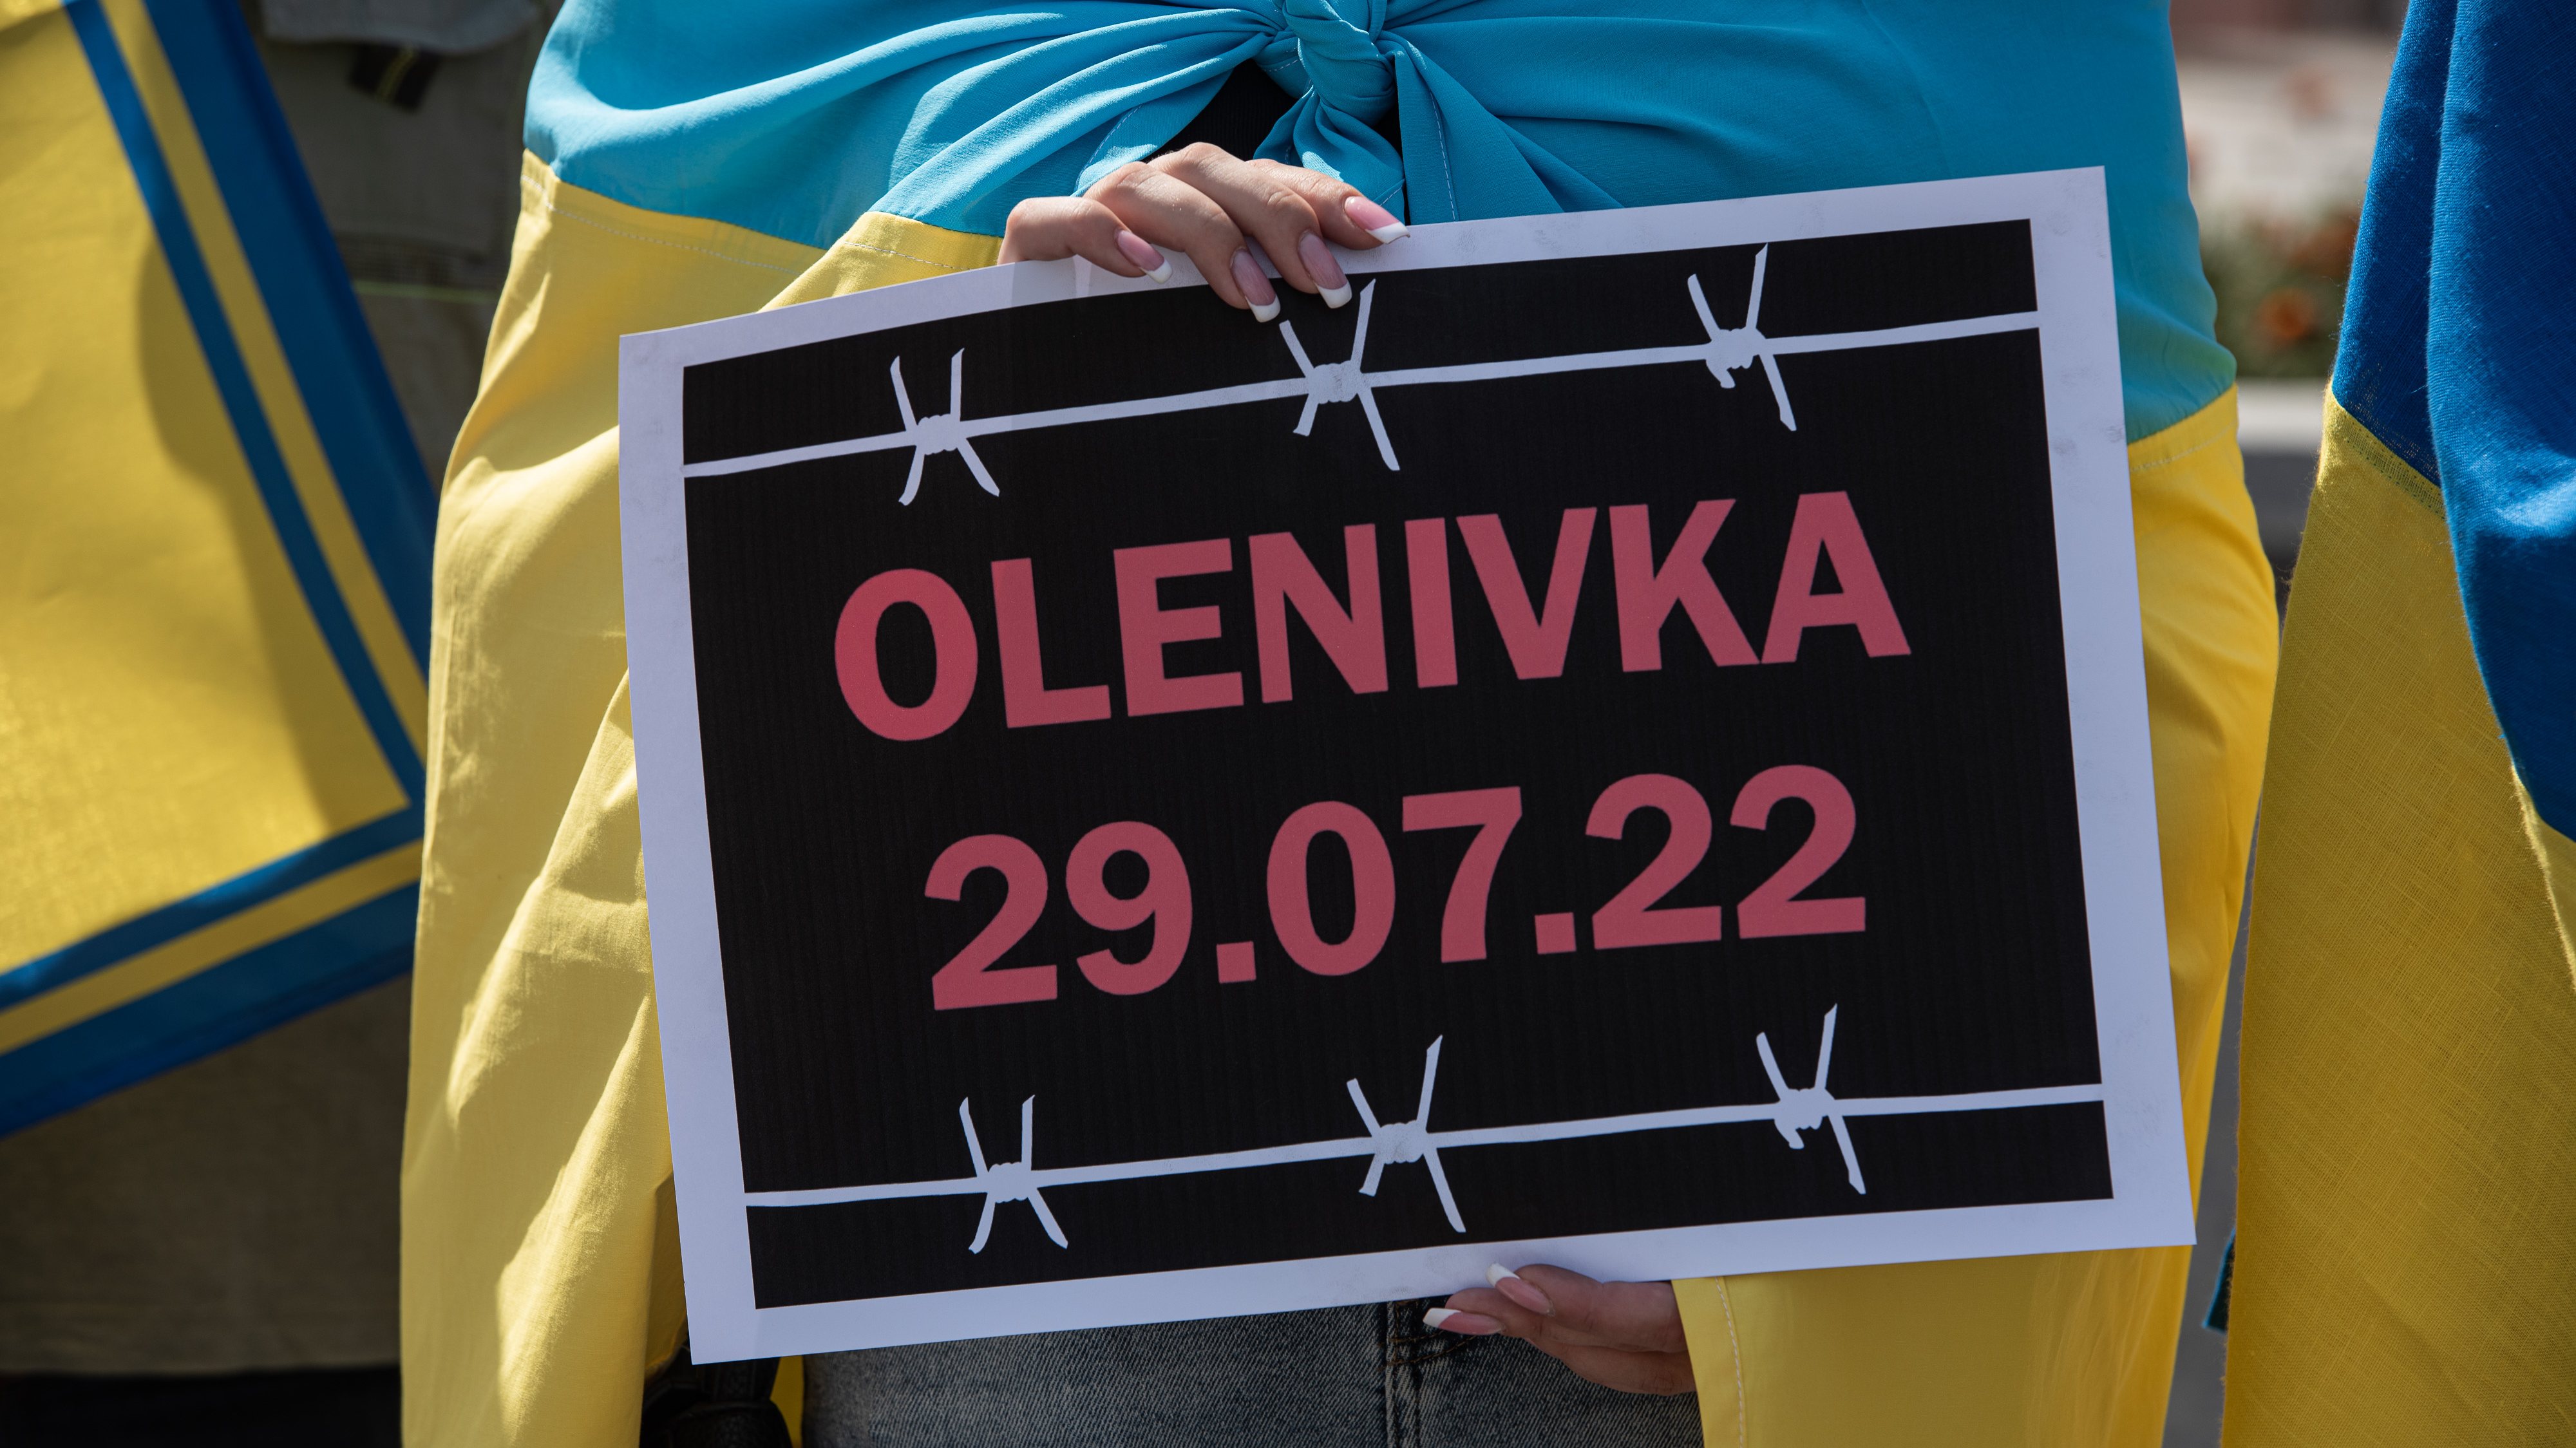 Rally In Support Of Azov Battalion Members After Olenivka Prison Bombing